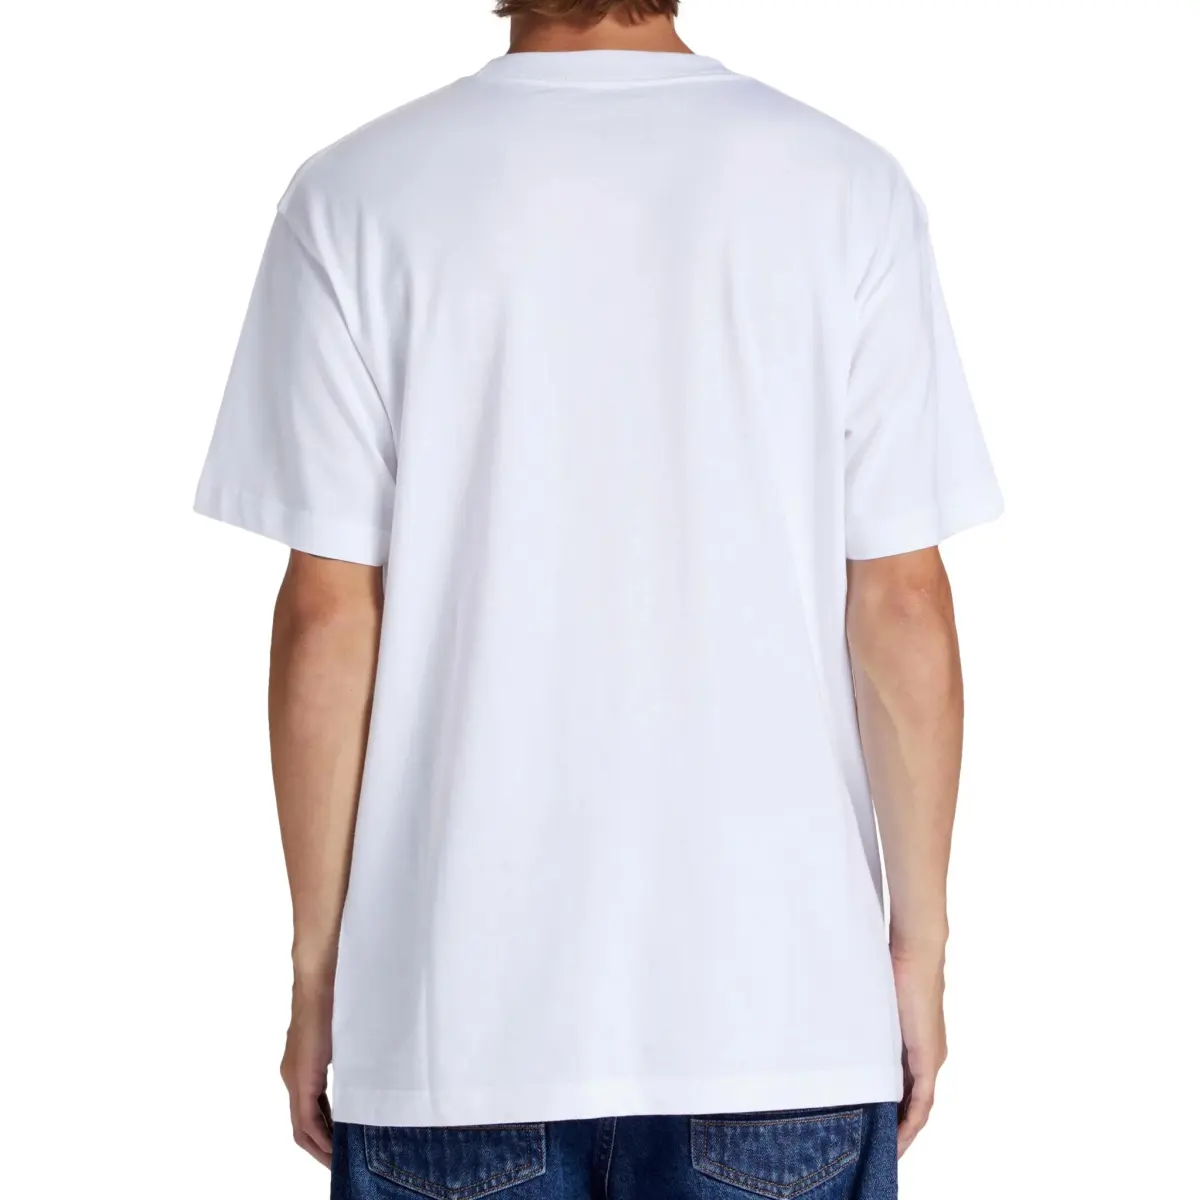 Dc Shoes Square star Fill White T-shirt